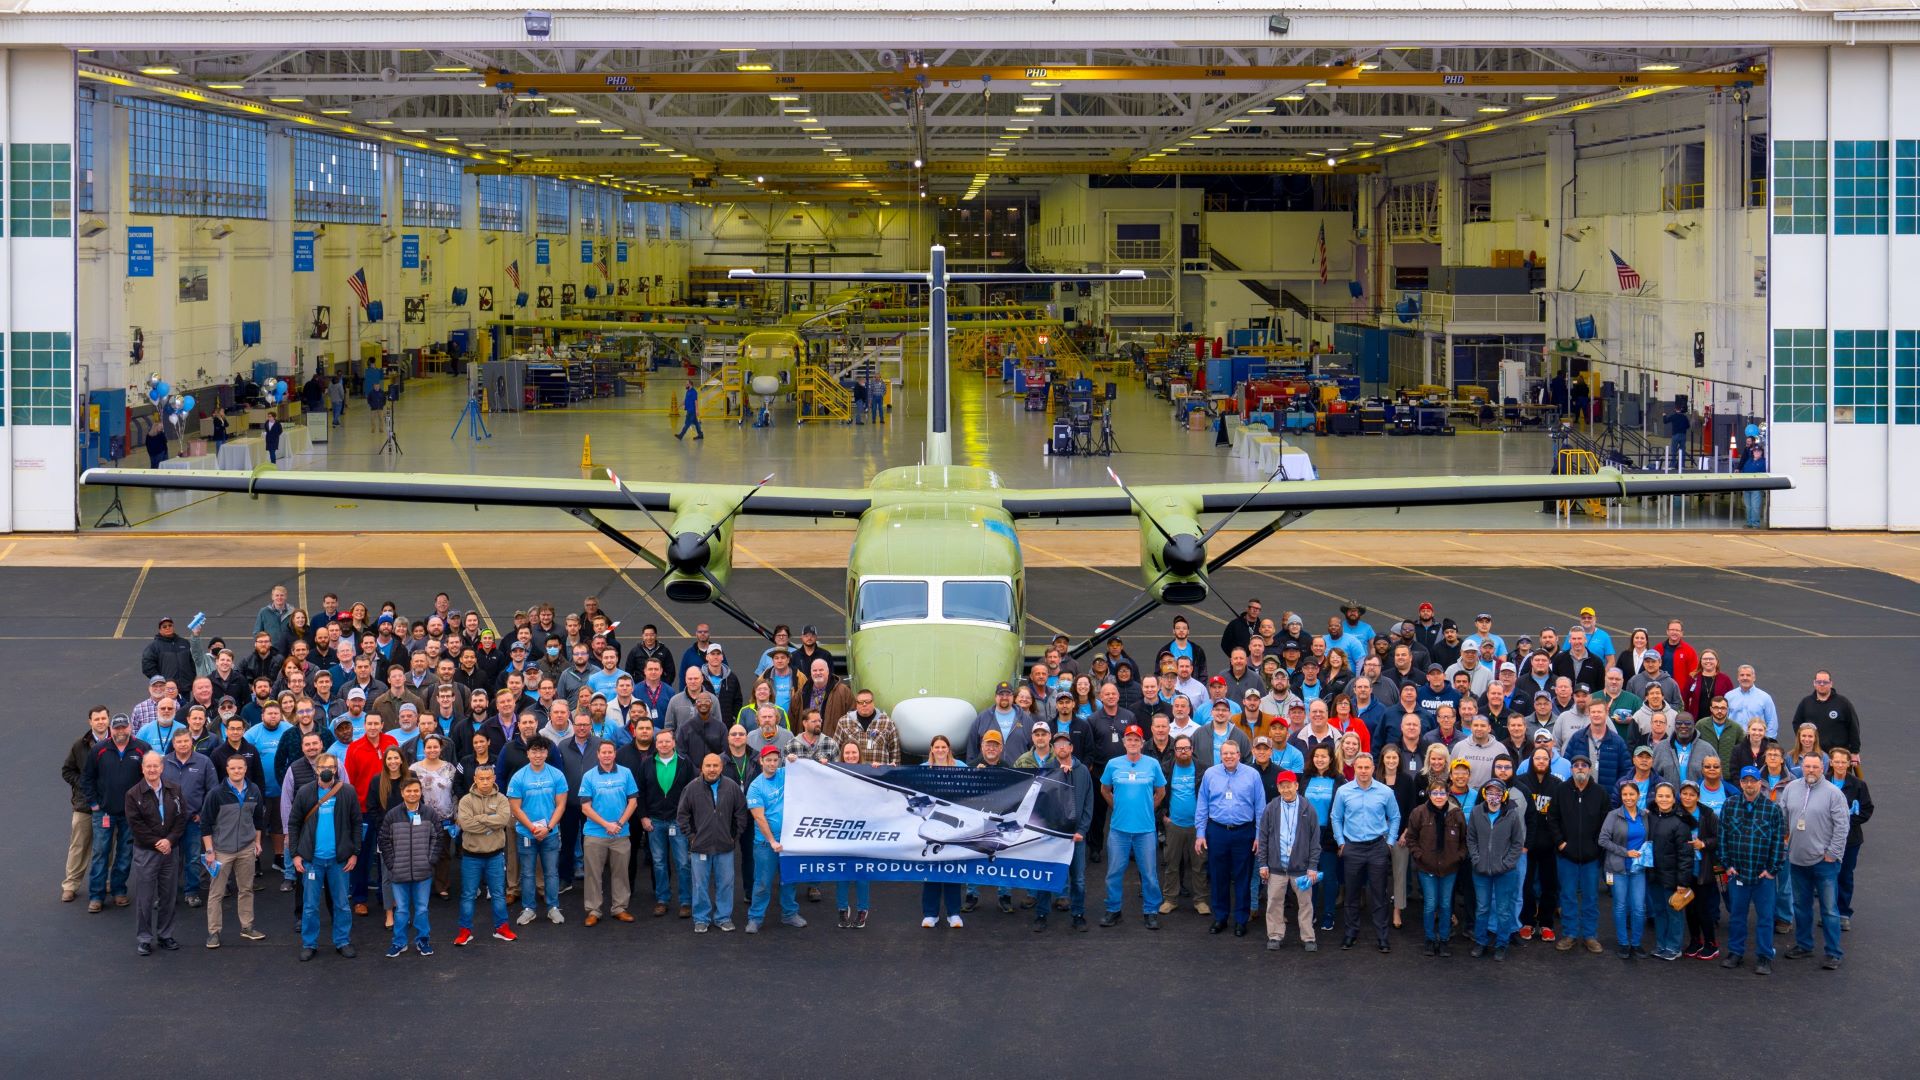 A twin-engine turboprop outside a production hanger with employees celebrating first aircraft rollout.